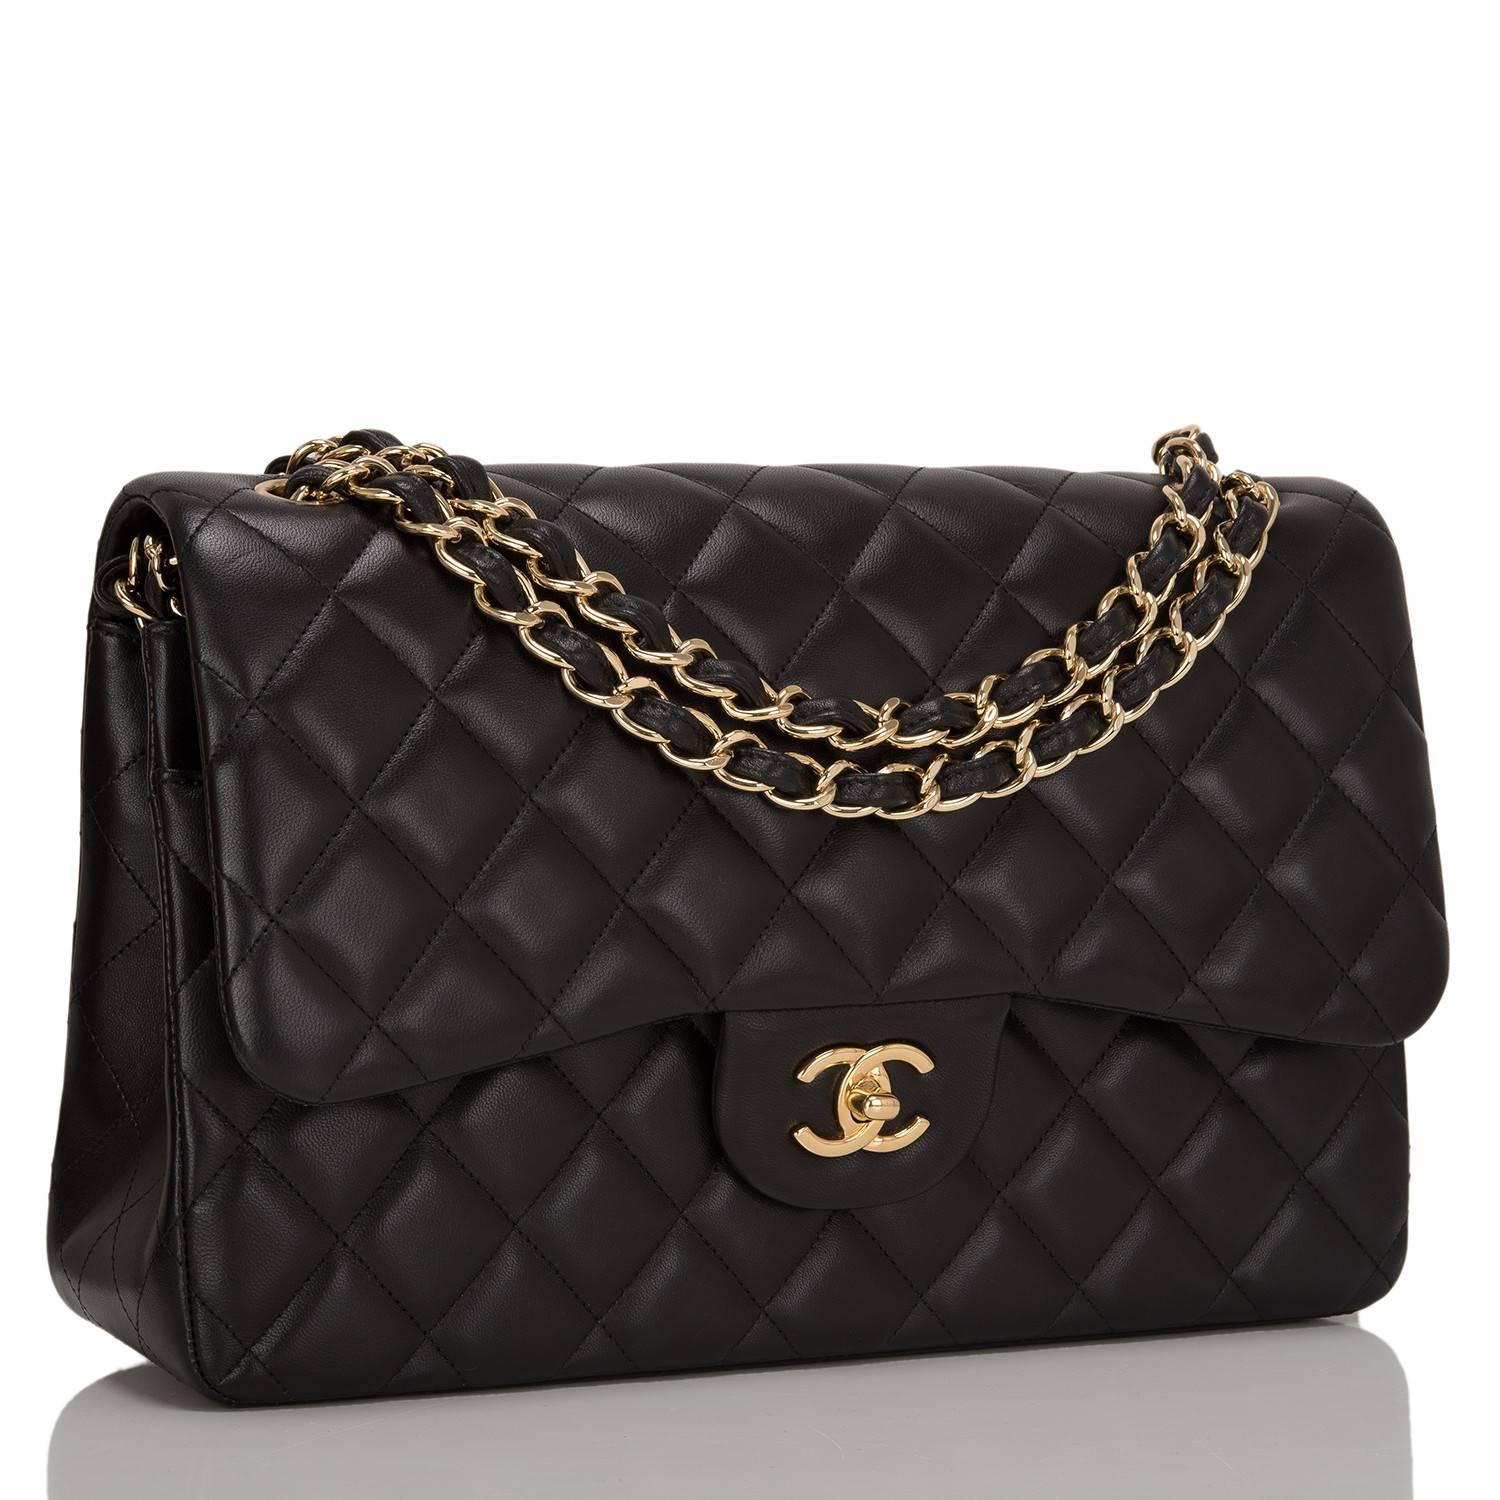 Chanel Jumbo Classic double flap bag of black lambskin leather with gold tone hardware.

This bag features a front flap with signature CC turnlock closure, a half moon back pocket, and an adjustable interwoven gold tone chain link with black leather